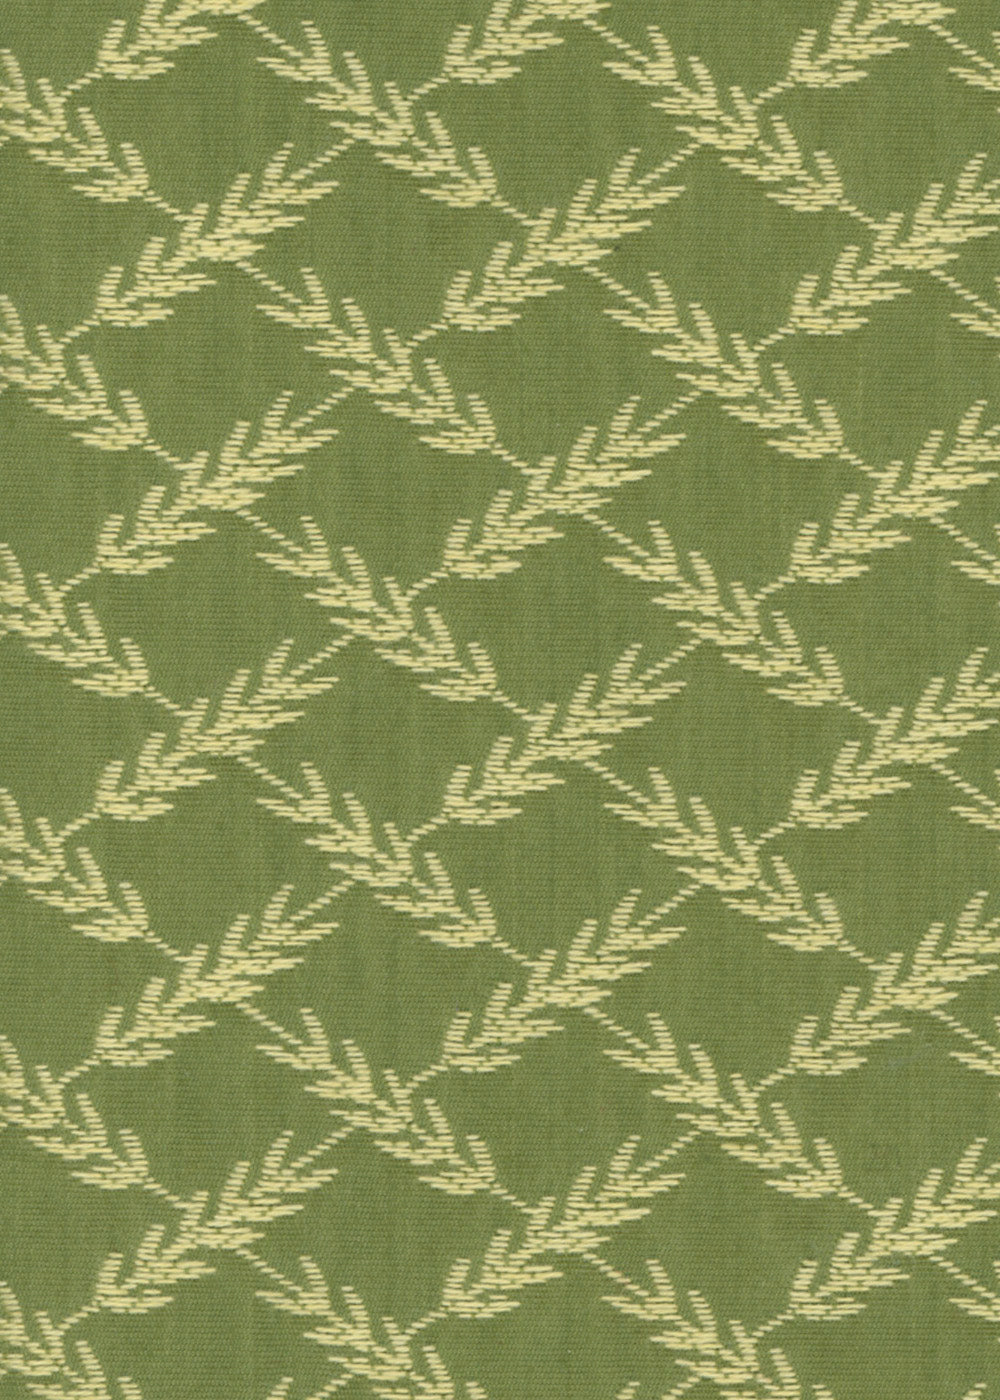 green upholstery fabric with a woven pattern that looks like ears of wheat